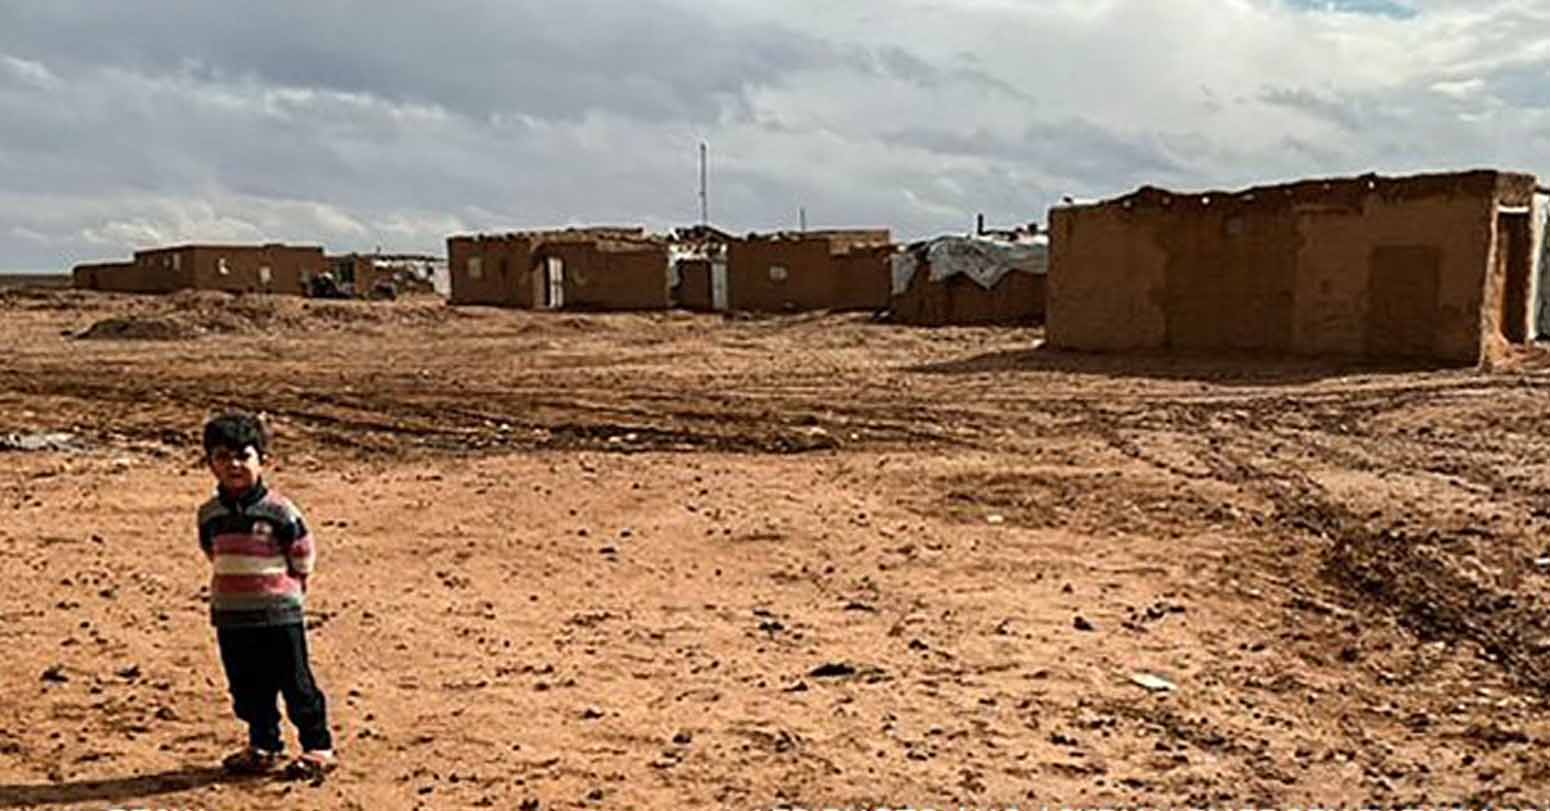 ‘Can’t Leave’: 10 Years On, Thousands Forgotten In Syria Desert Camp